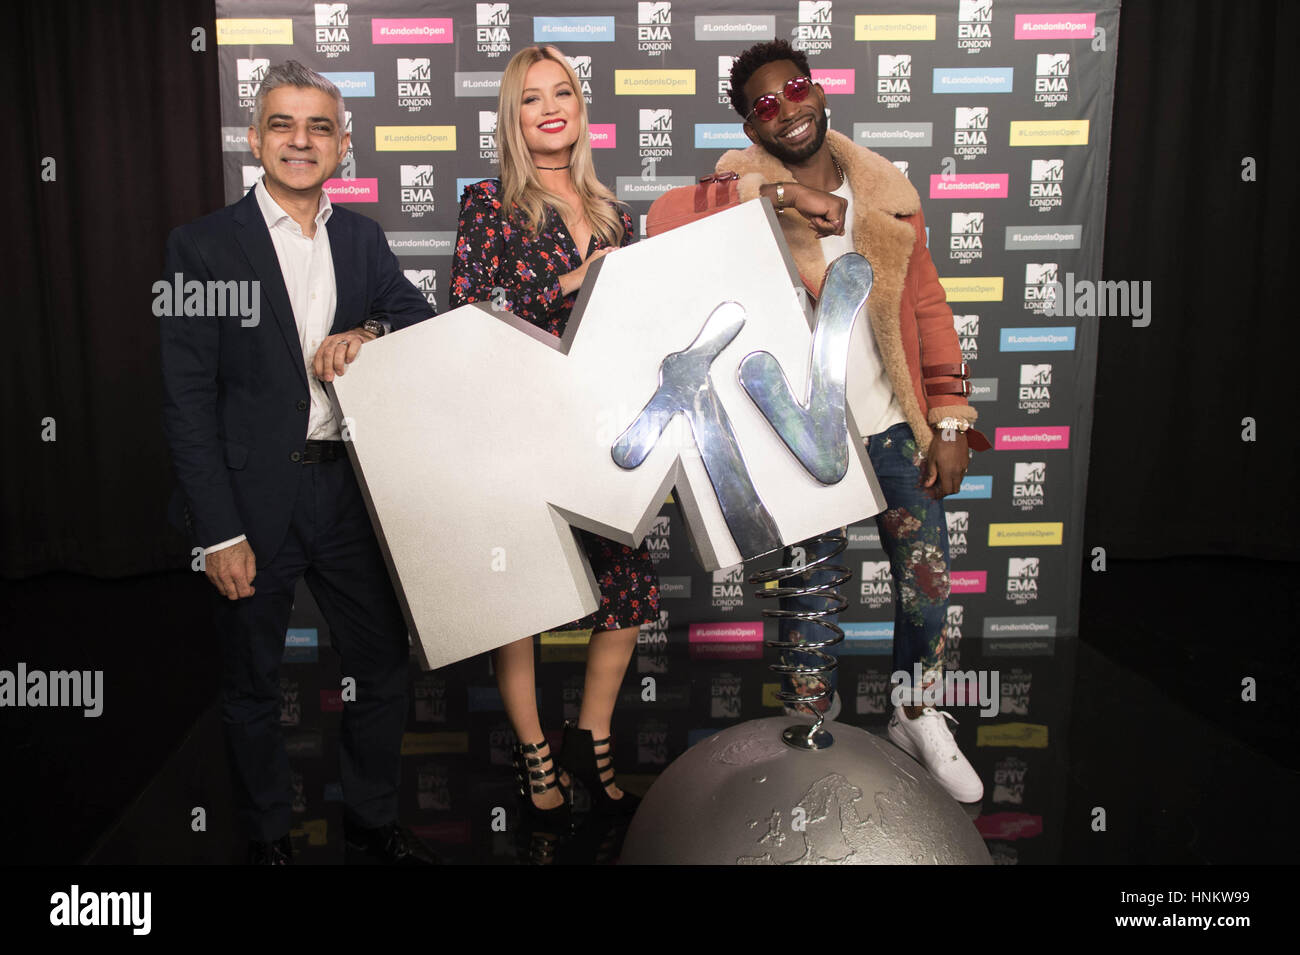 Mayor of London Sadiq Khan poses for a photograph with Tinie Tempah and MTV presenter Laura Whitmore at the offices of Viacom in London where he announced that the MTV European Music Awards will be held in the city on November 12. Stock Photo